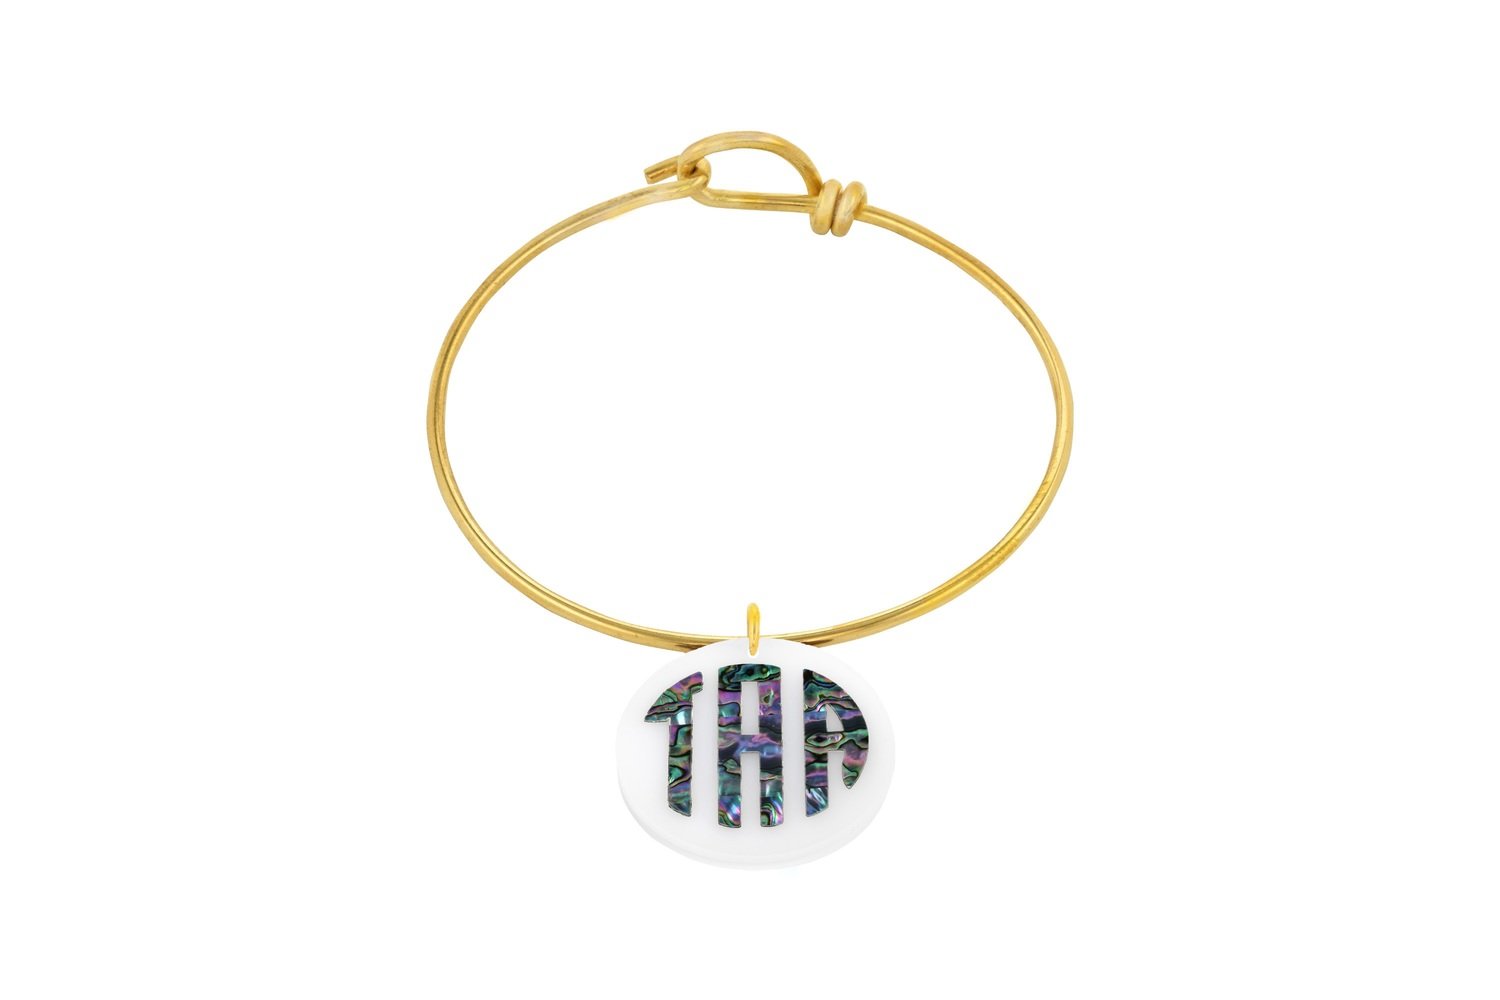 Mother of Pearl Monogram with Decorative Wire Bracelet